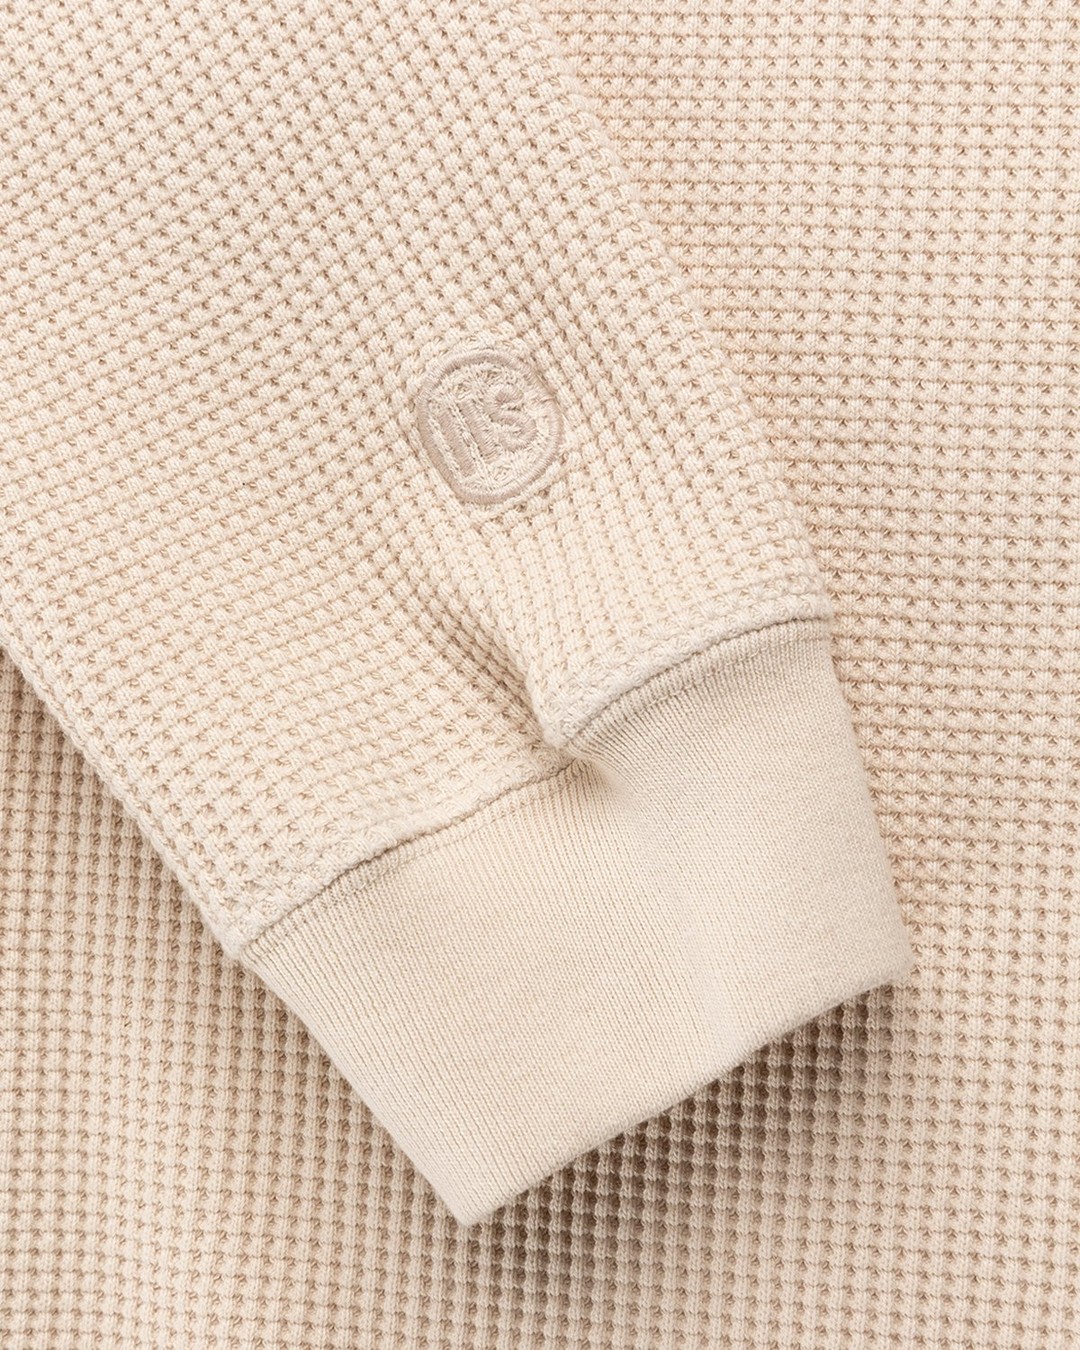 Highsnobiety – Thermal Staples Long Sleeve Off White - Sweats - Beige - Image 6